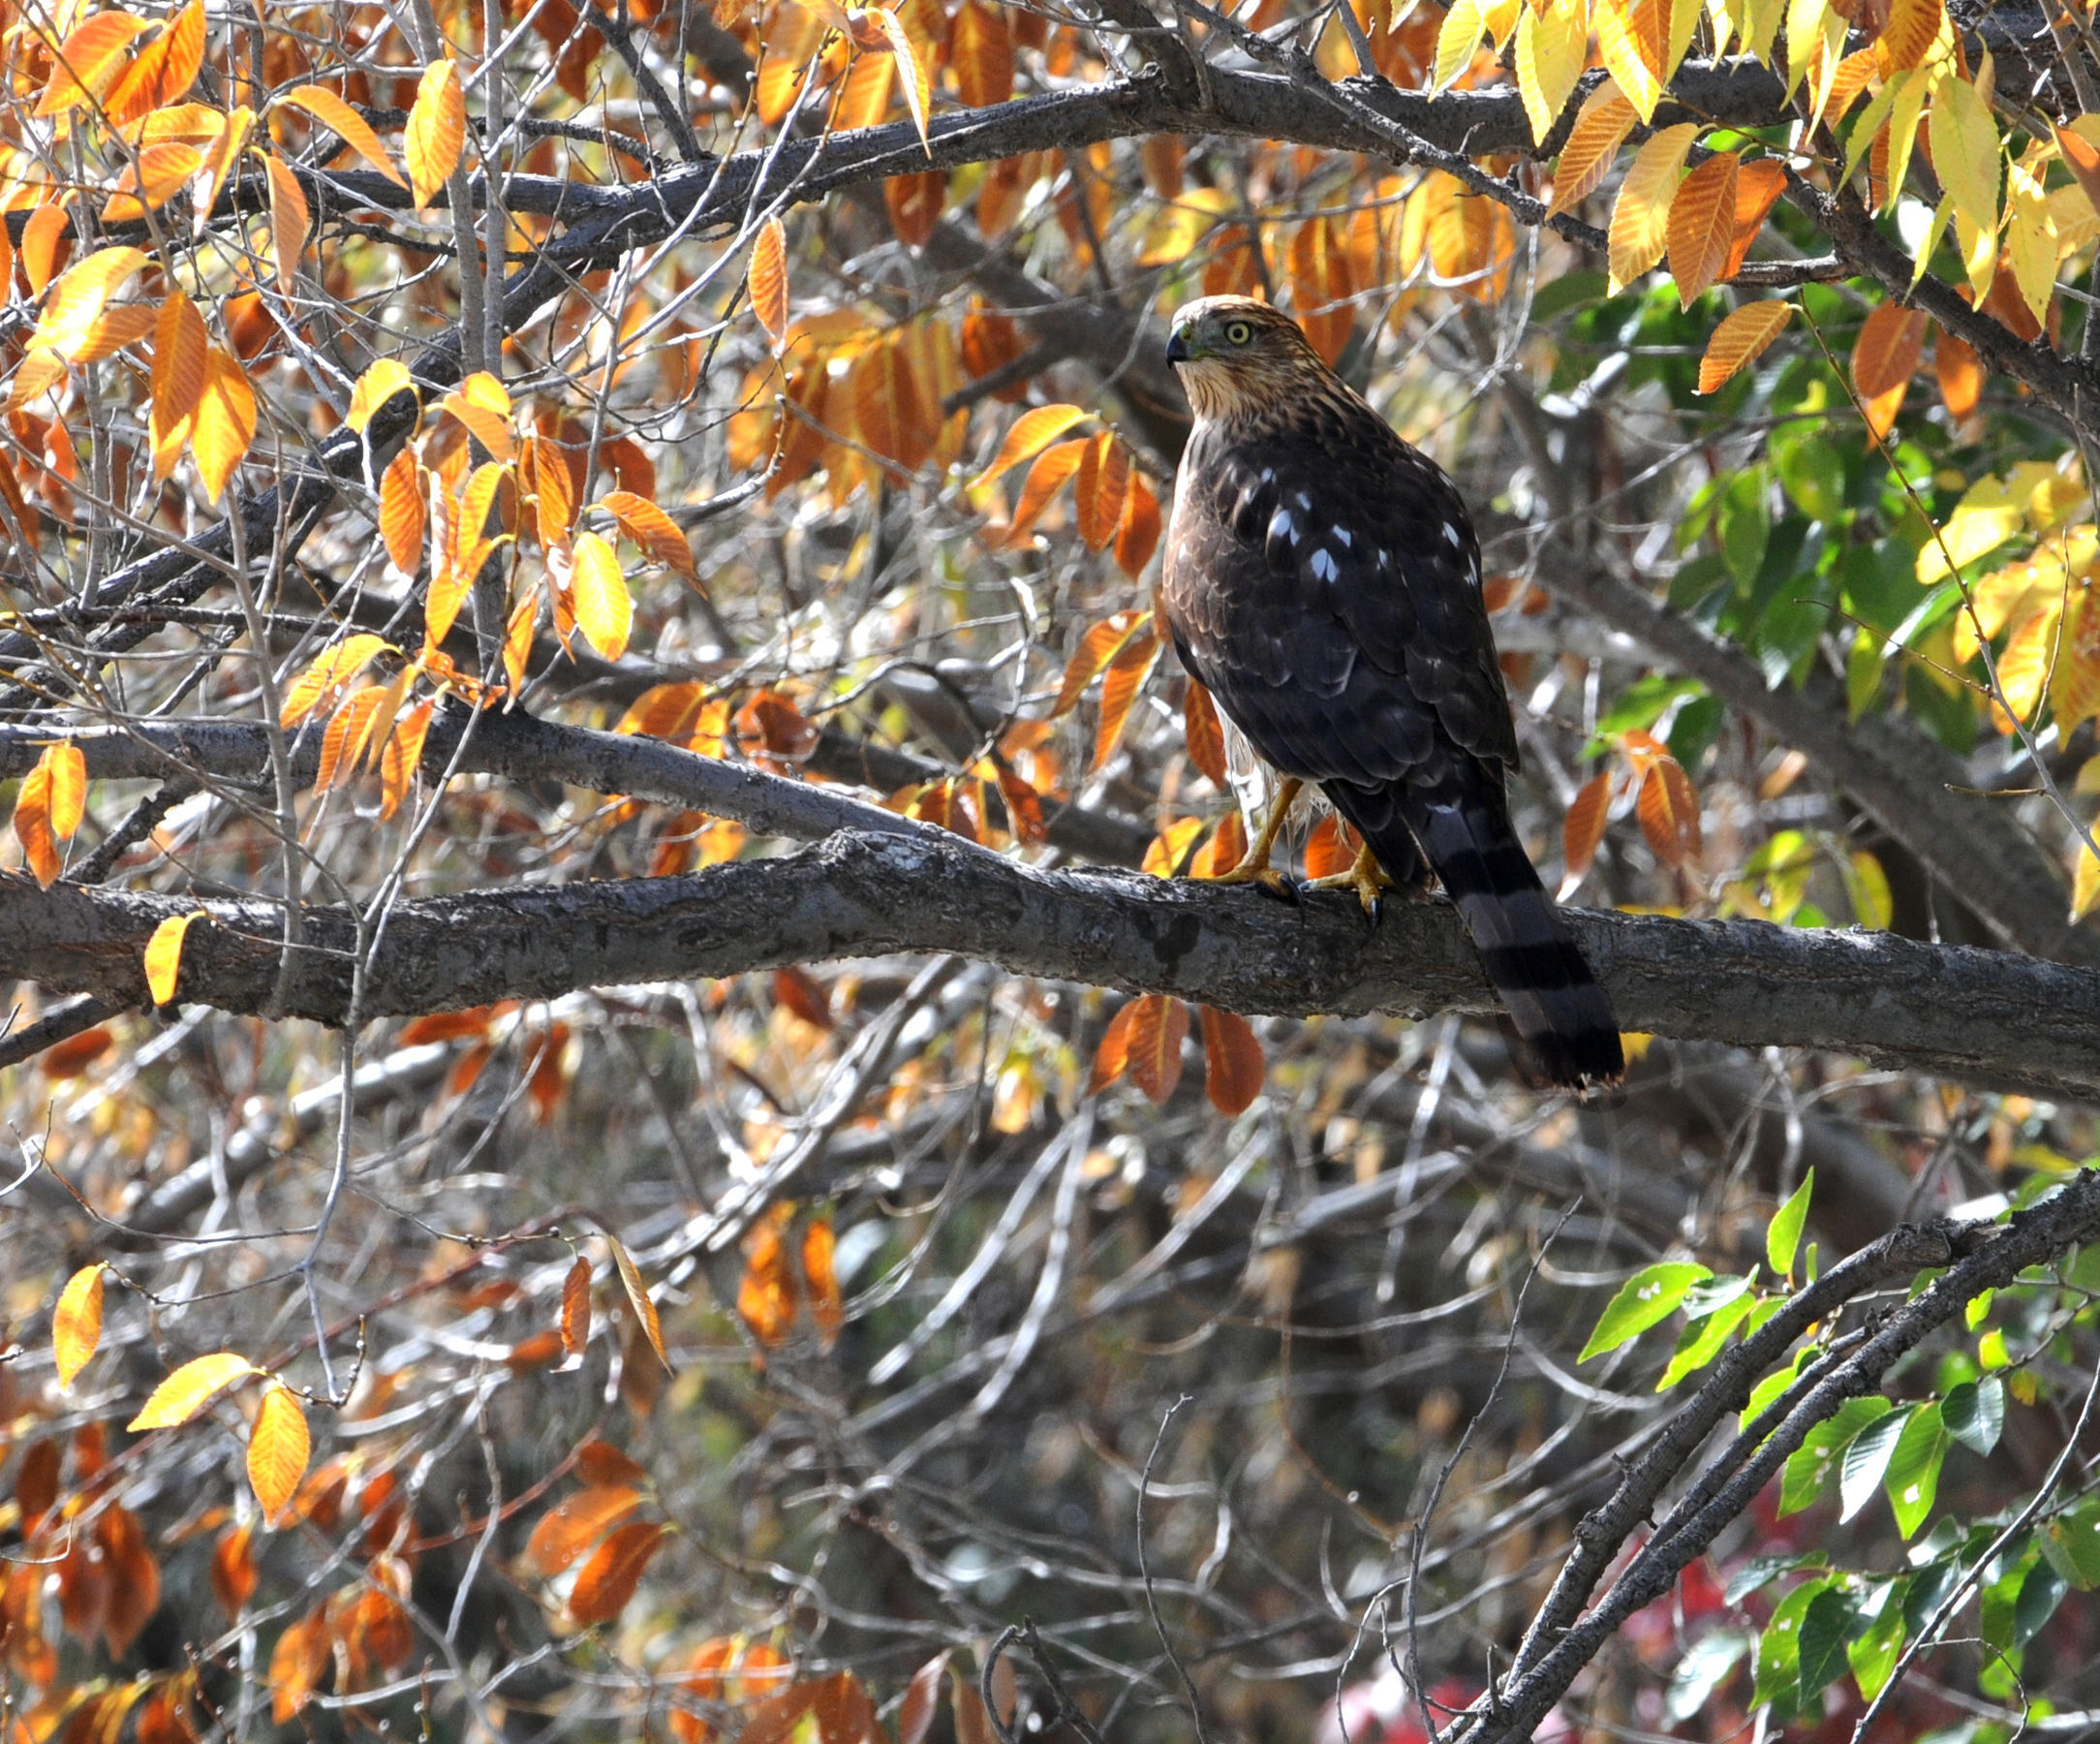 An adult Cooper's Hawk, a long-tailed raptor with a vigilant yellow eye, perches amongst the changing colors of fall foliage.